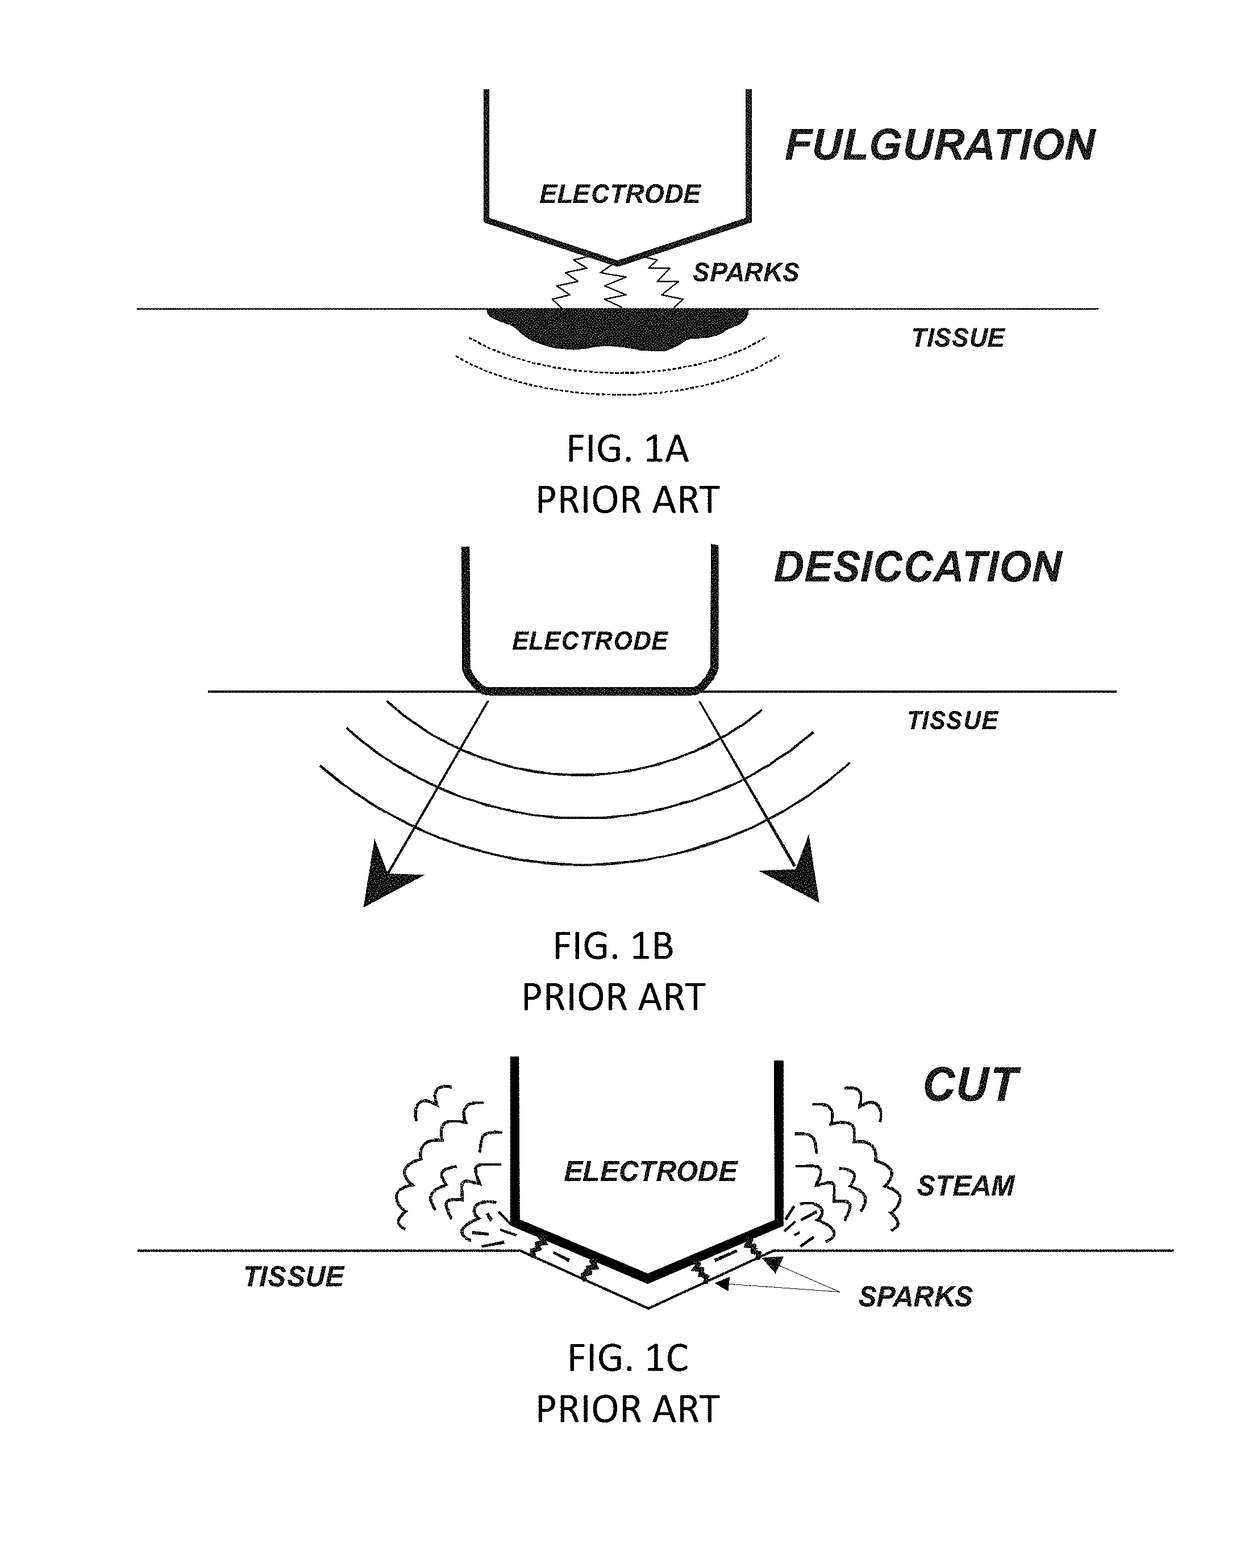 System and method for electrosurgical conductive gas cutting for improving eschar, sealing vessels and tissues